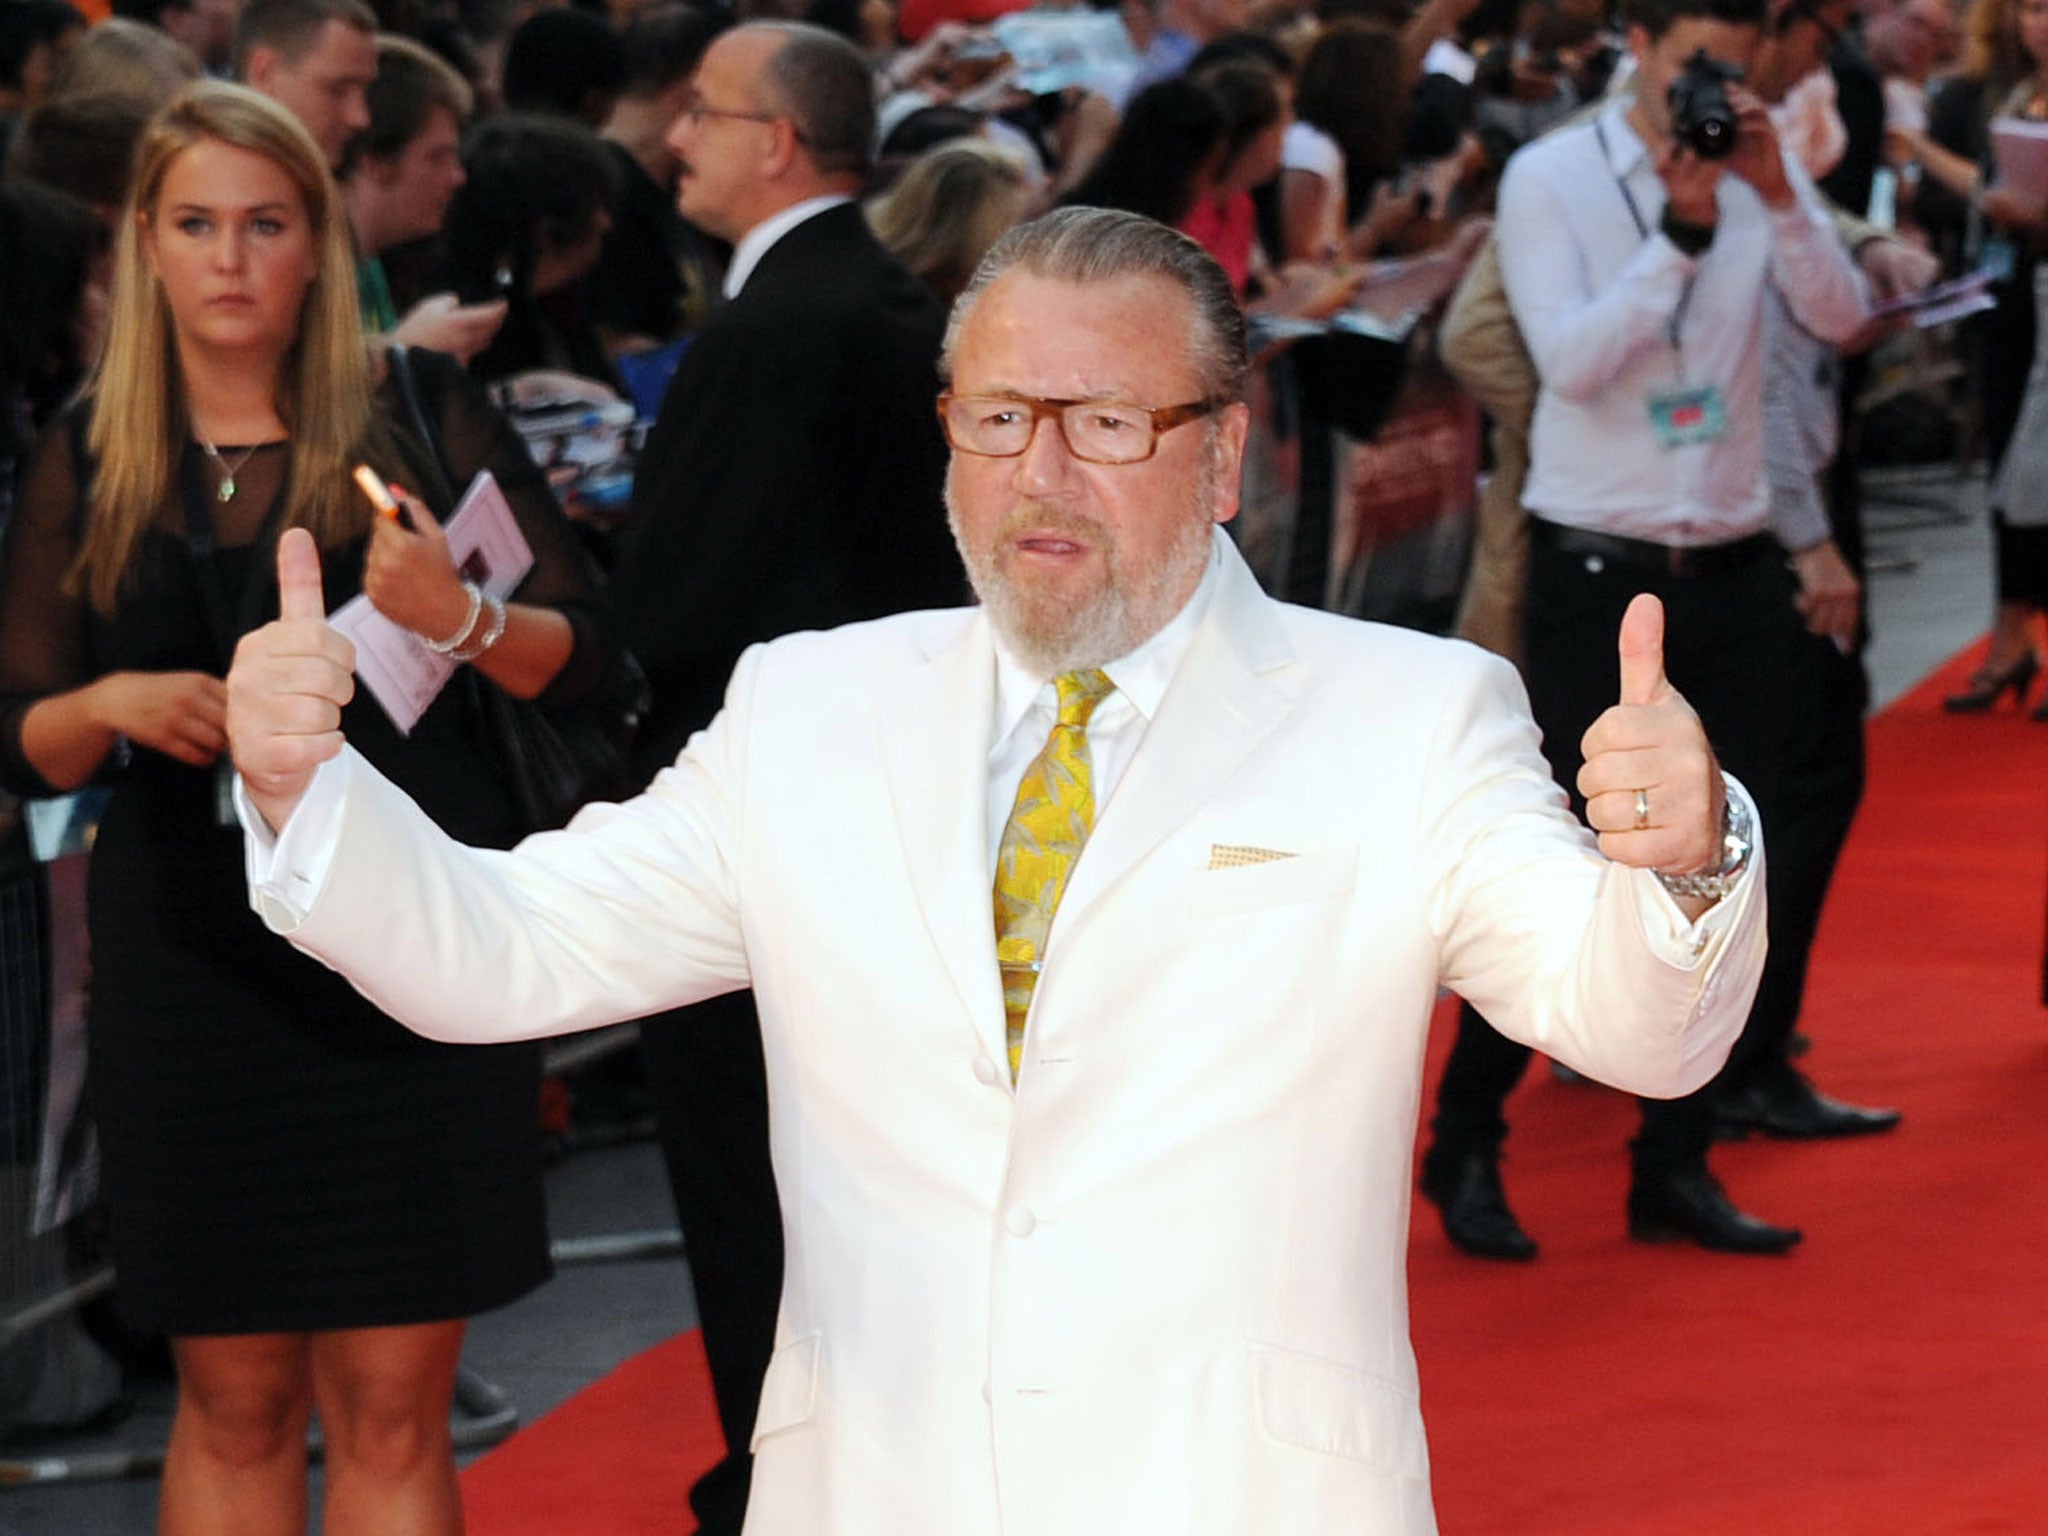 Ray Winstone attends The Sweeney - UK Film Premiere at Vue Leicester Square on September 3, 2012 in London, England.